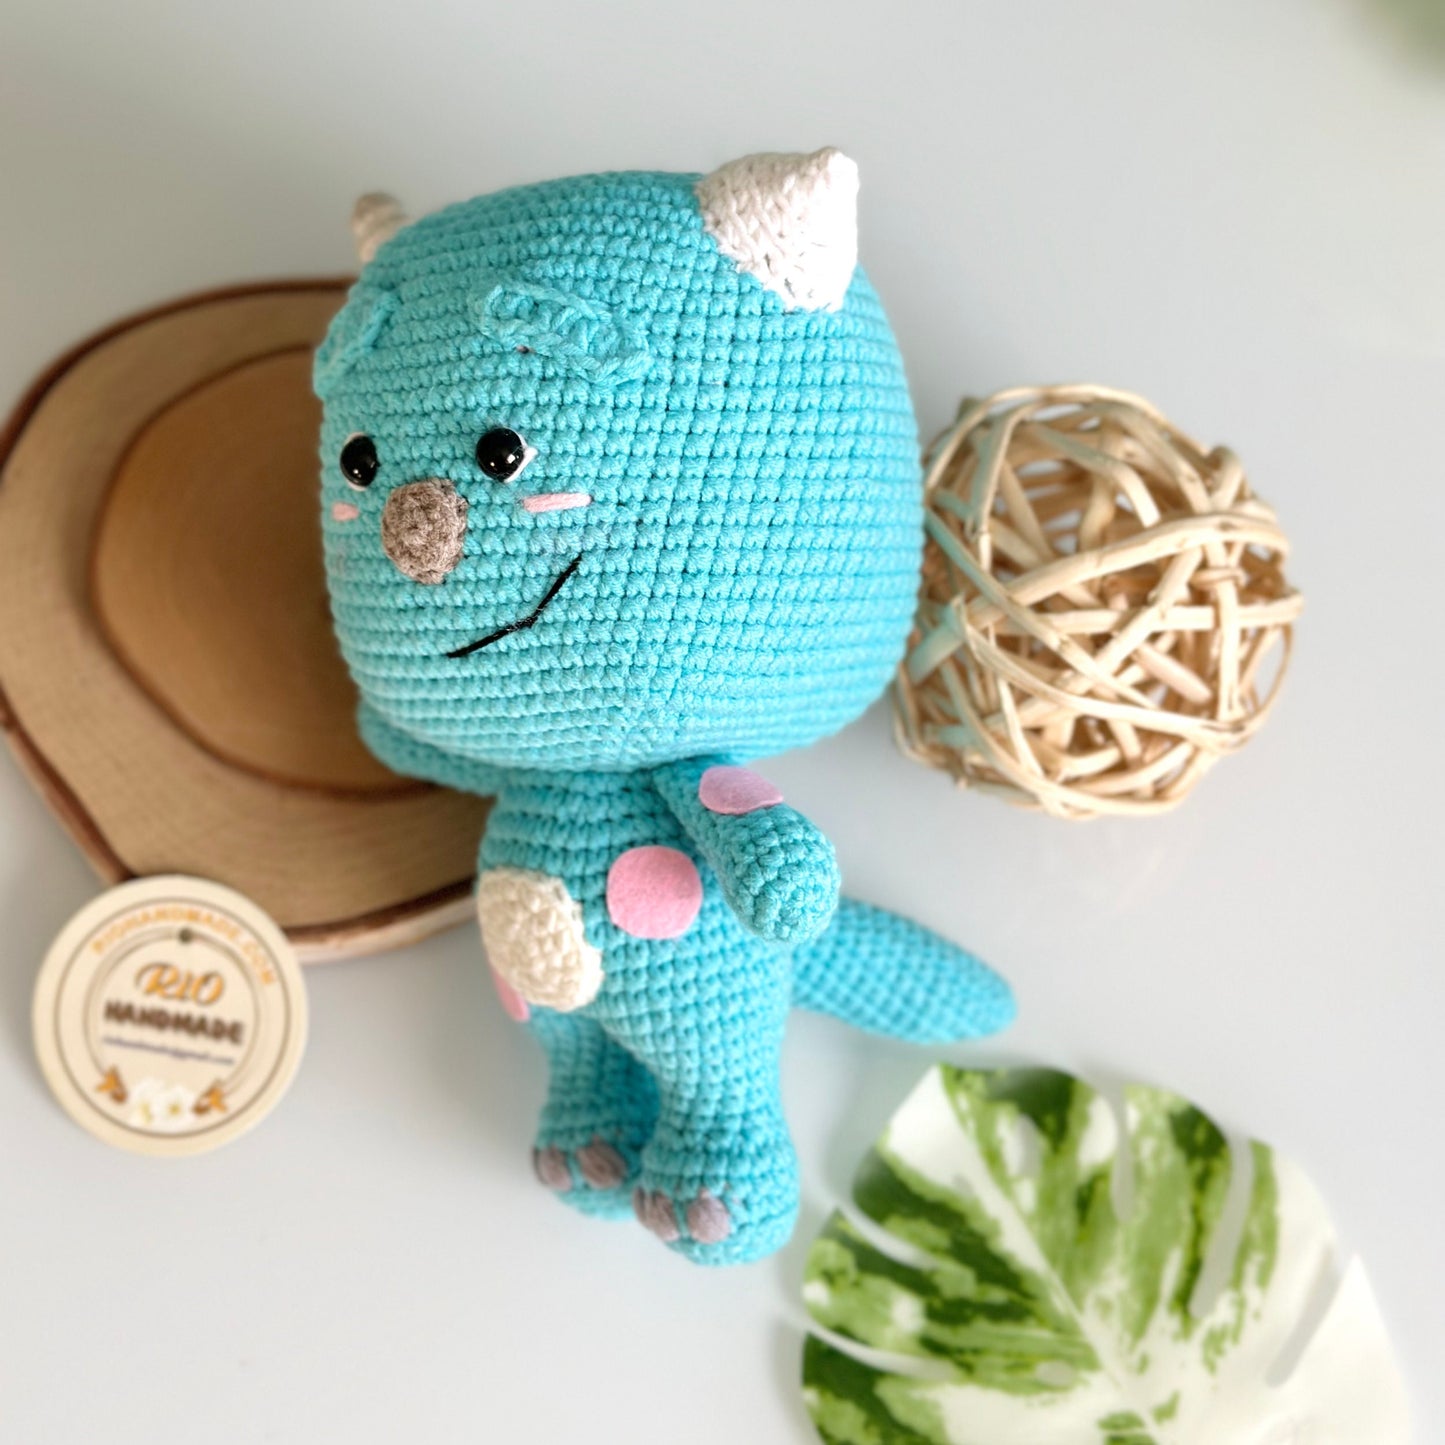 Handmade Monster Crochet, Amigurumi Sully, Boo Doll, Mike, Crochet Toys Inspired By Monster Inc. plushie toy, cute gift